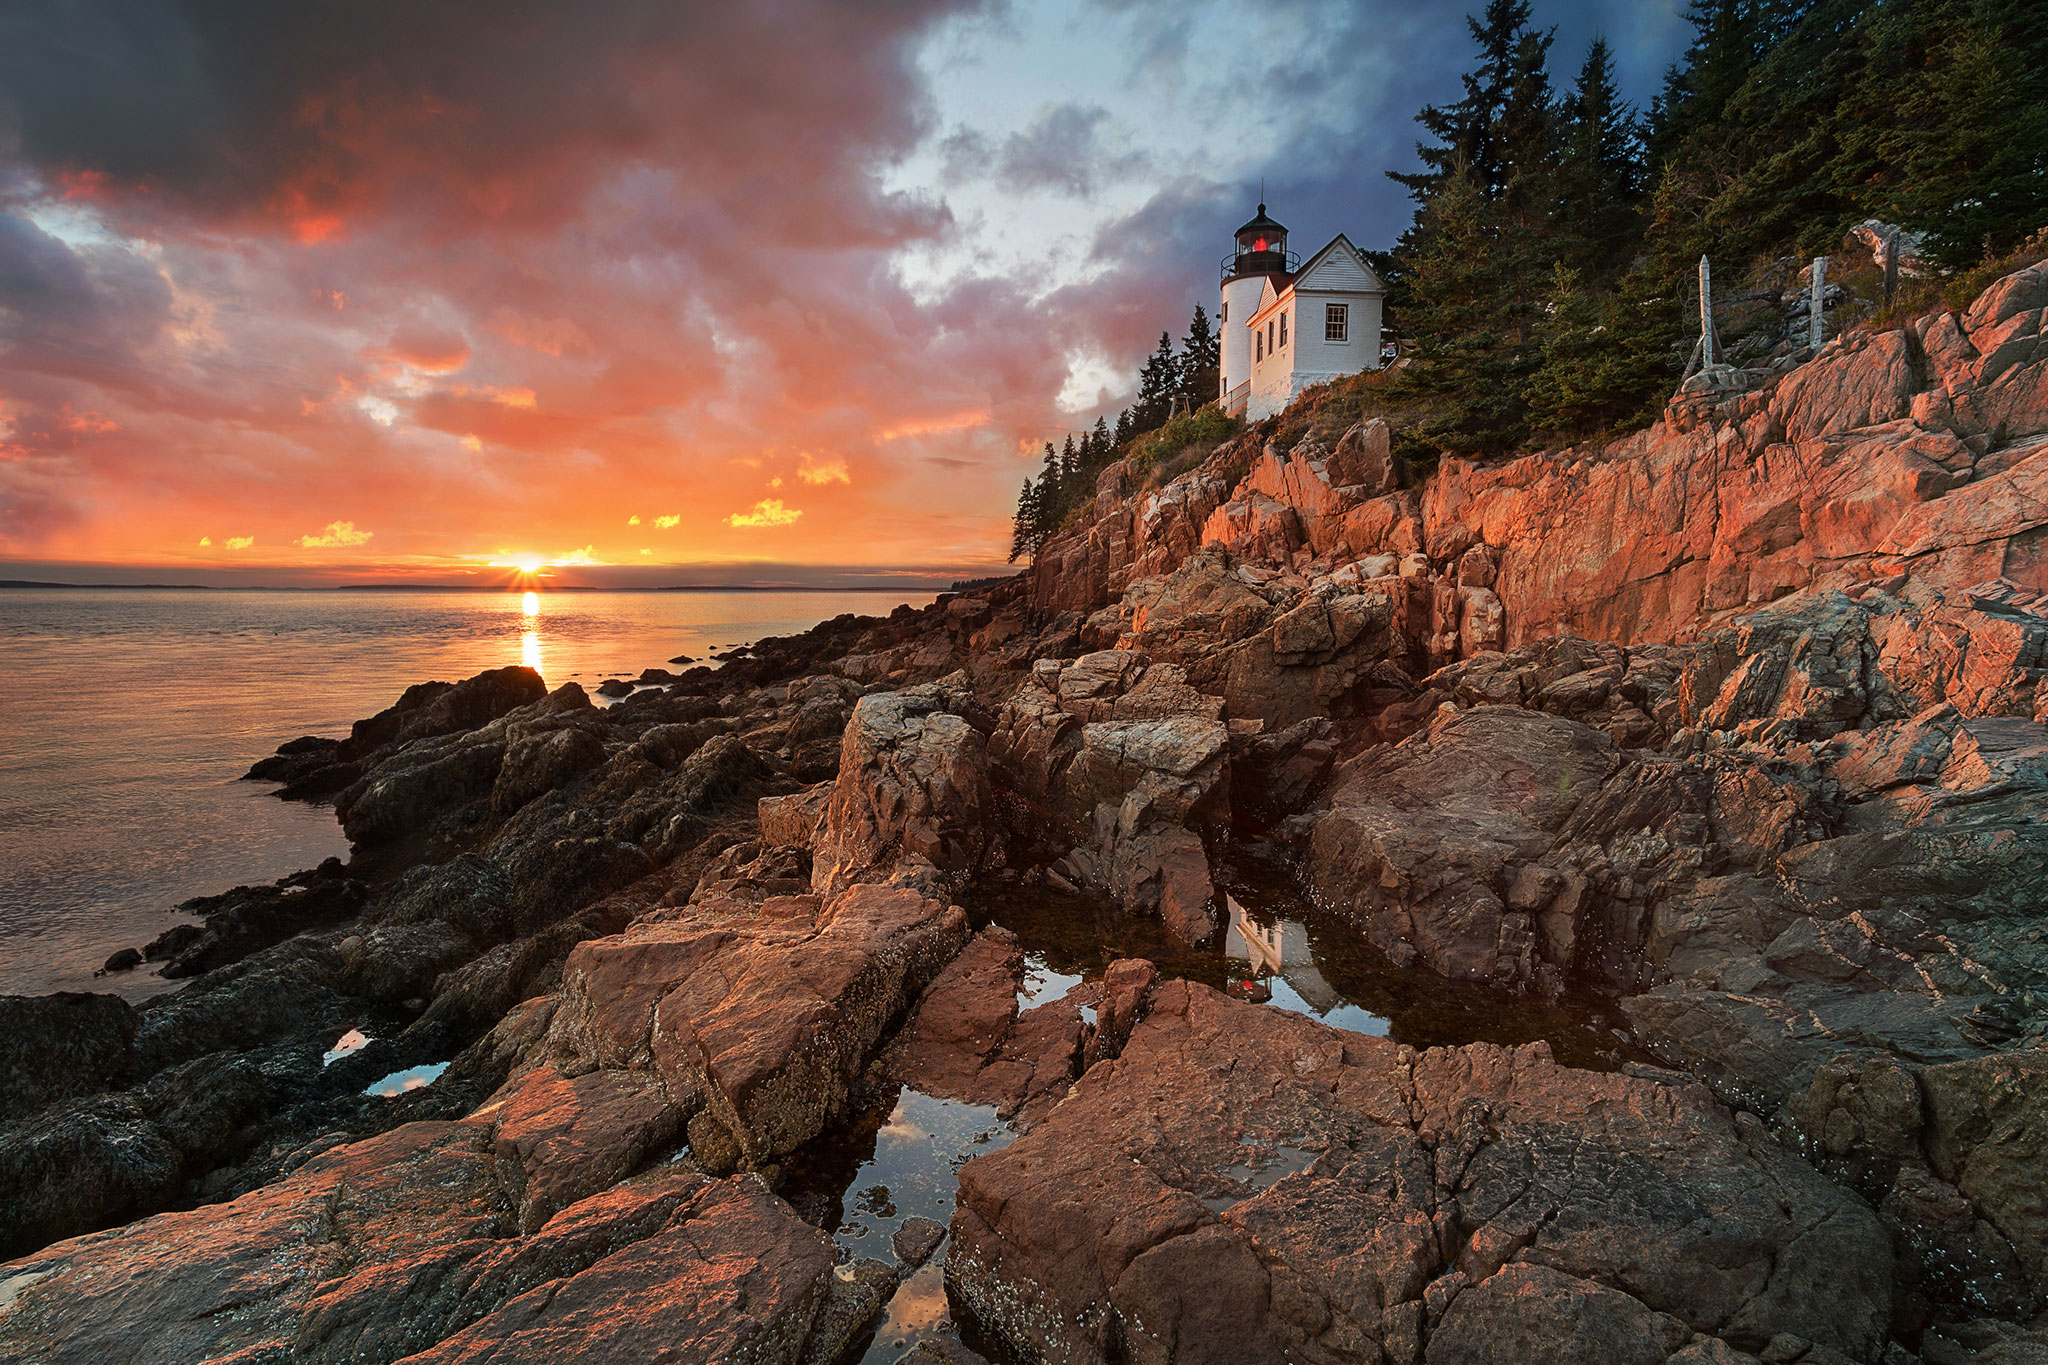 A serene sunset over a calm sea, casting a warm glow on the clouds and illuminating a small white lighthouse perched atop rugged rocky cliffs surrounded by pine trees.